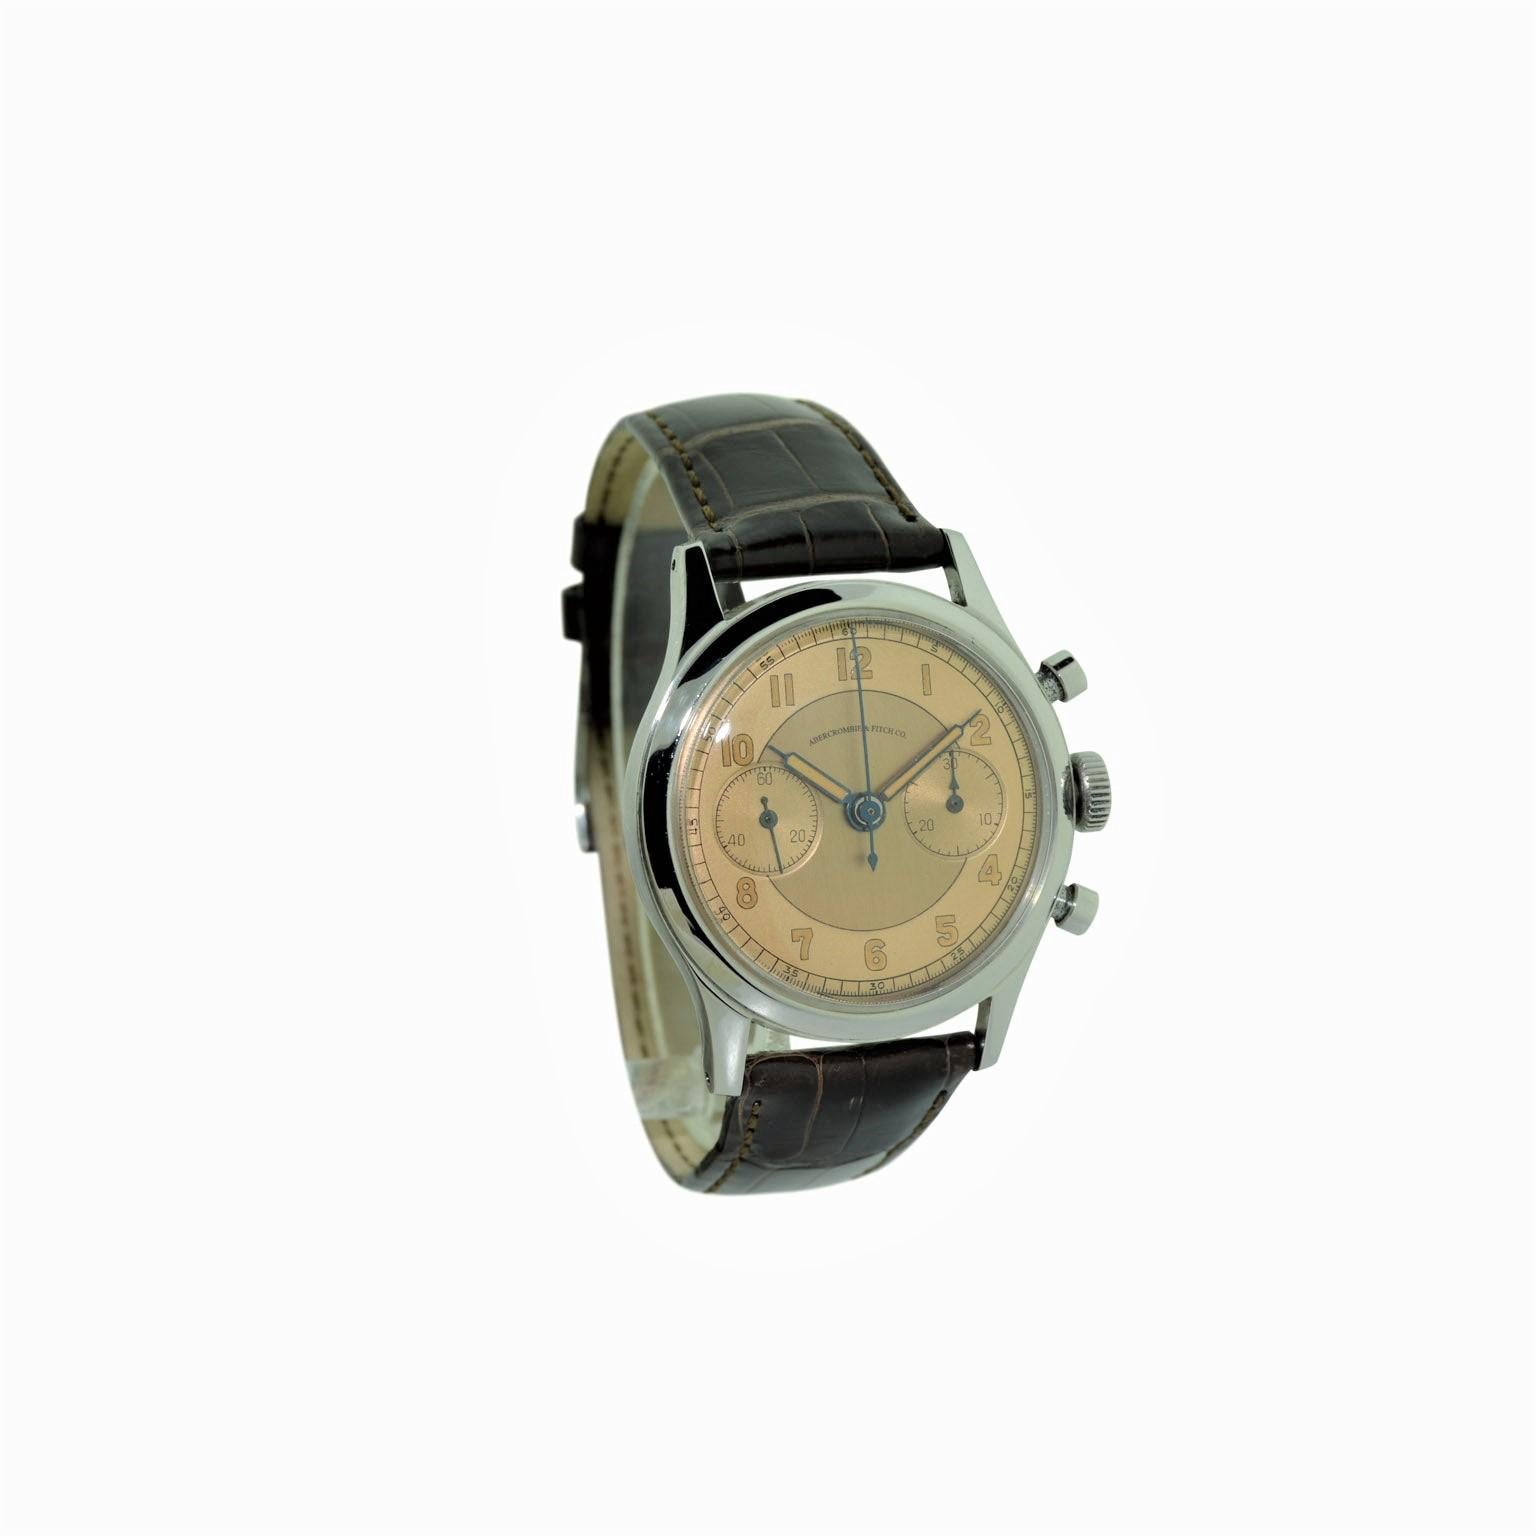 FACTORY / HOUSE: Abercrombie & Fitch 
STYLE / REFERENCE: Art Deco / Waterproof Style
METAL / MATERIAL: Stainless Steel 
DIMENSIONS:  46mm  X  38mm
CIRCA: 1940's
MOVEMENT / CALIBER: Manual Winding / 17 Jewels / Venus 14 L
DIAL / HANDS: Arabic